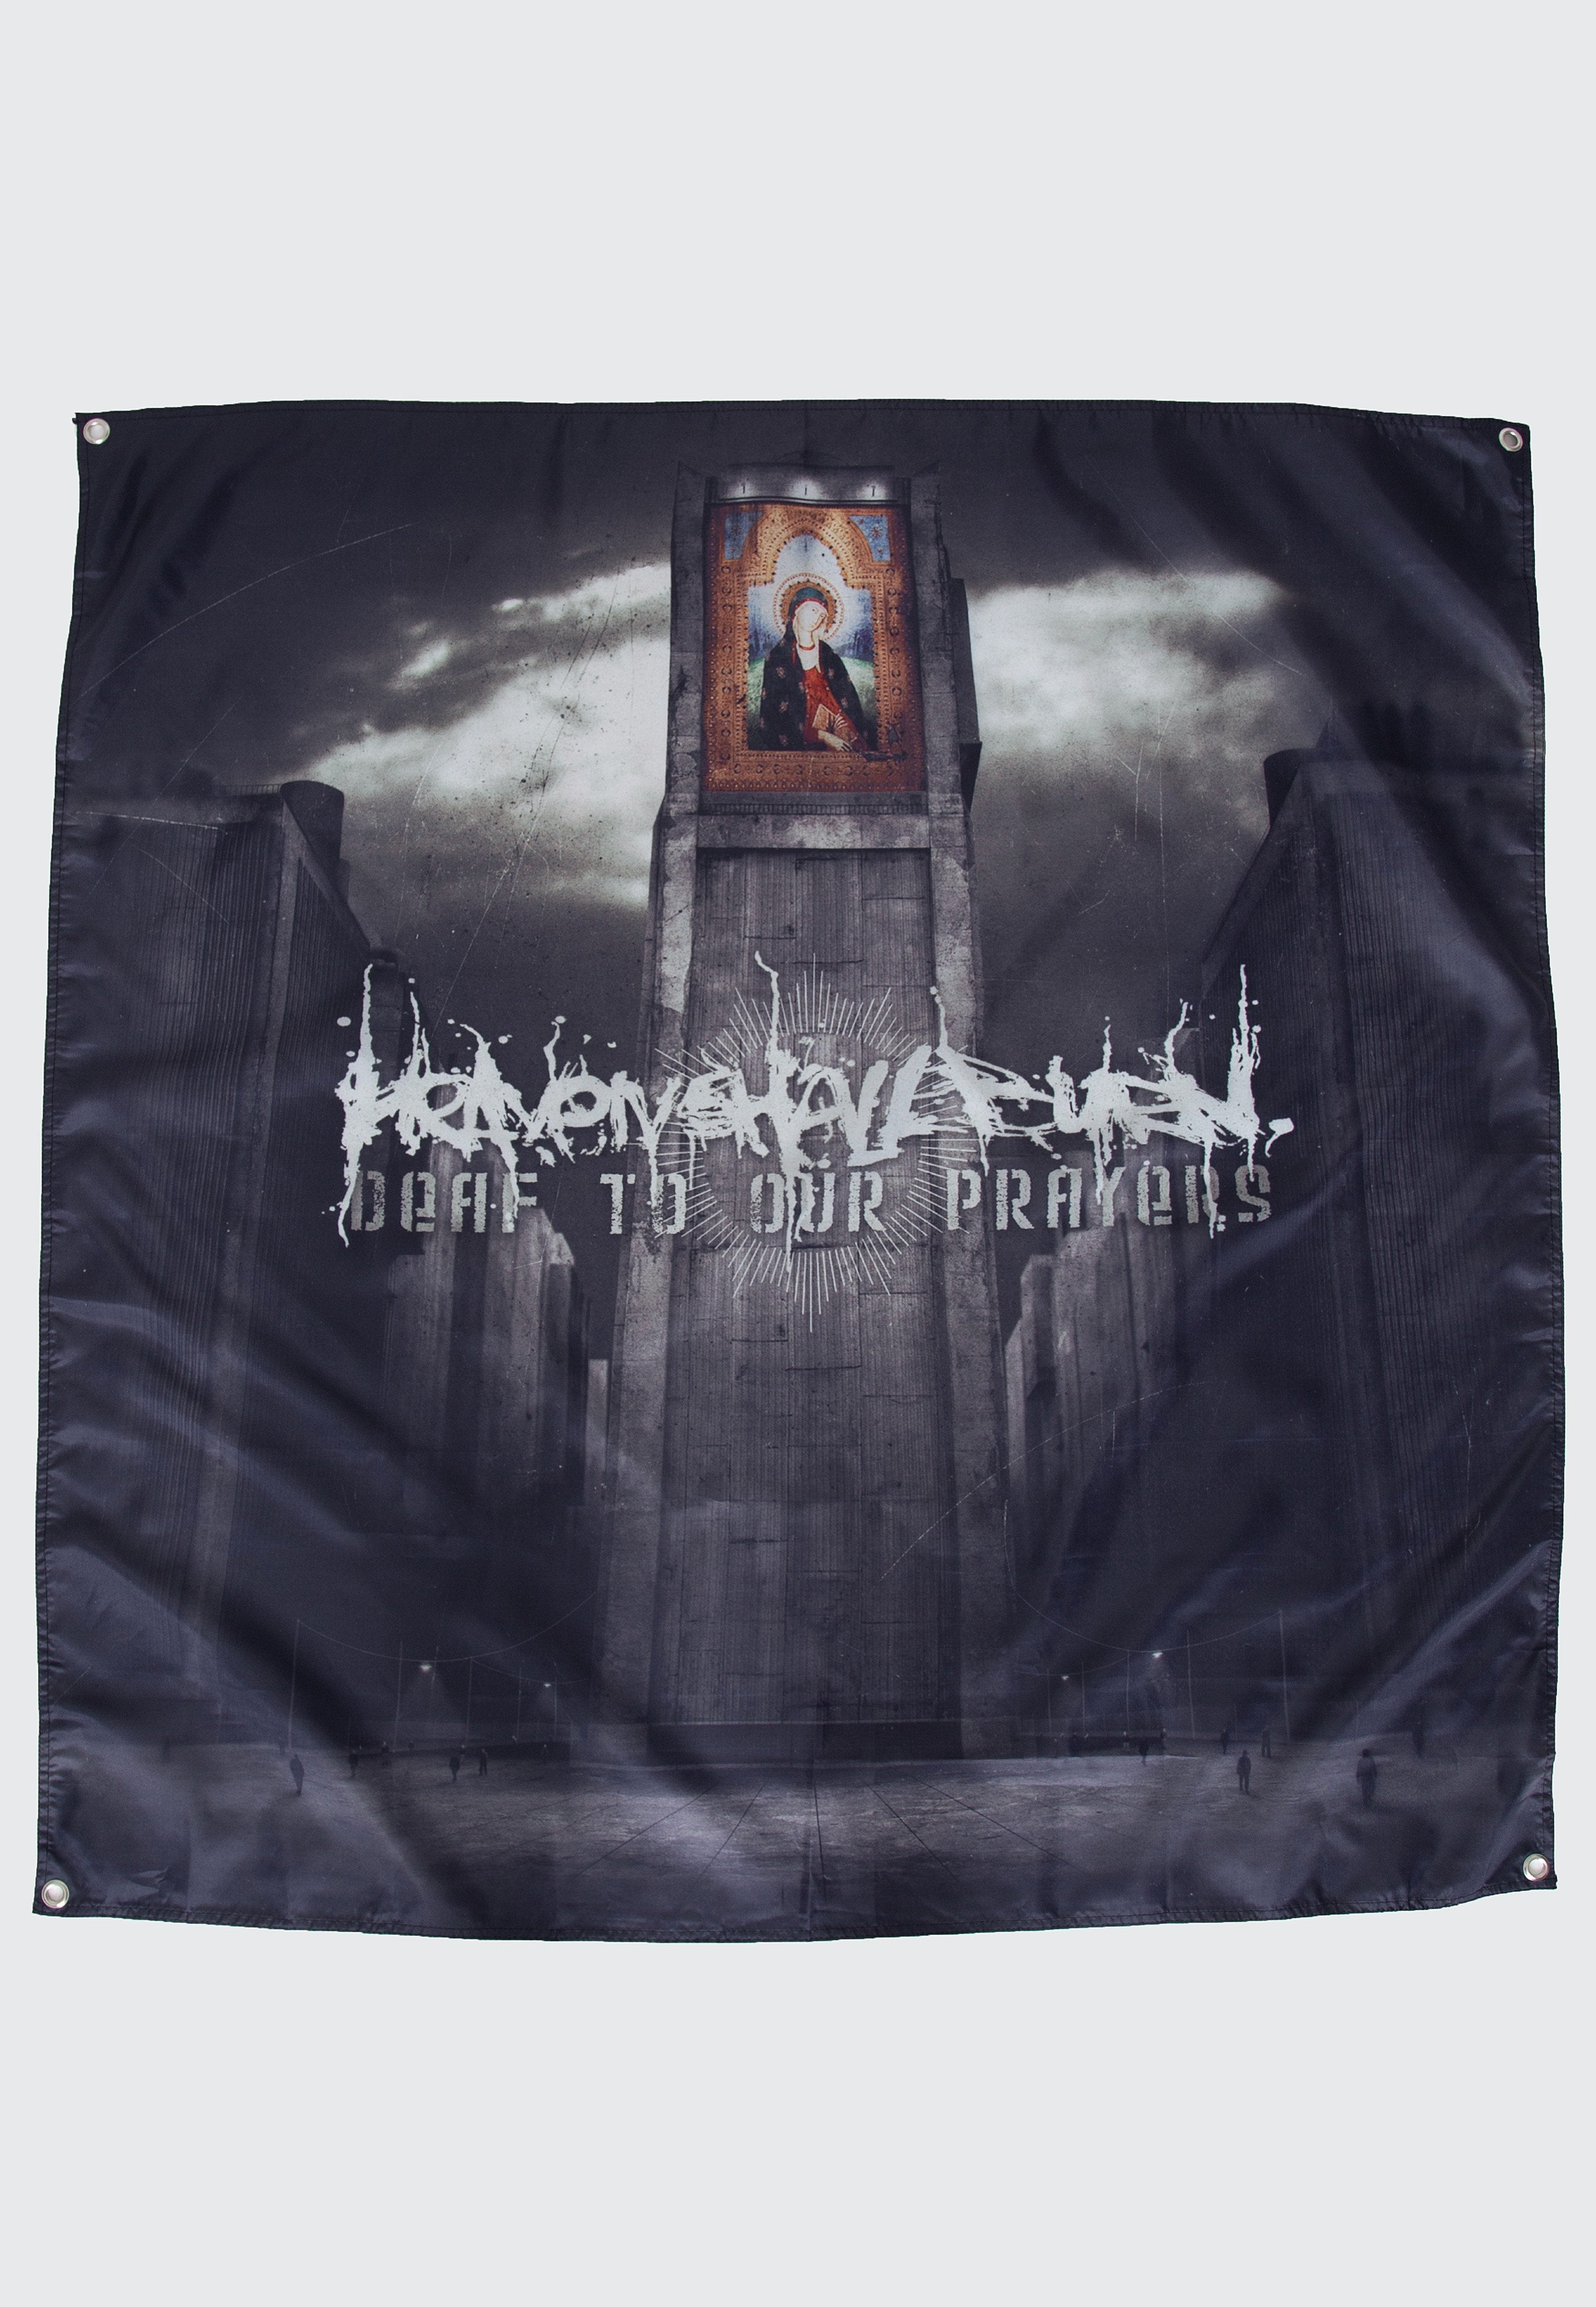 Heaven Shall Burn - Deaf To Our Prayers Cover - Flag